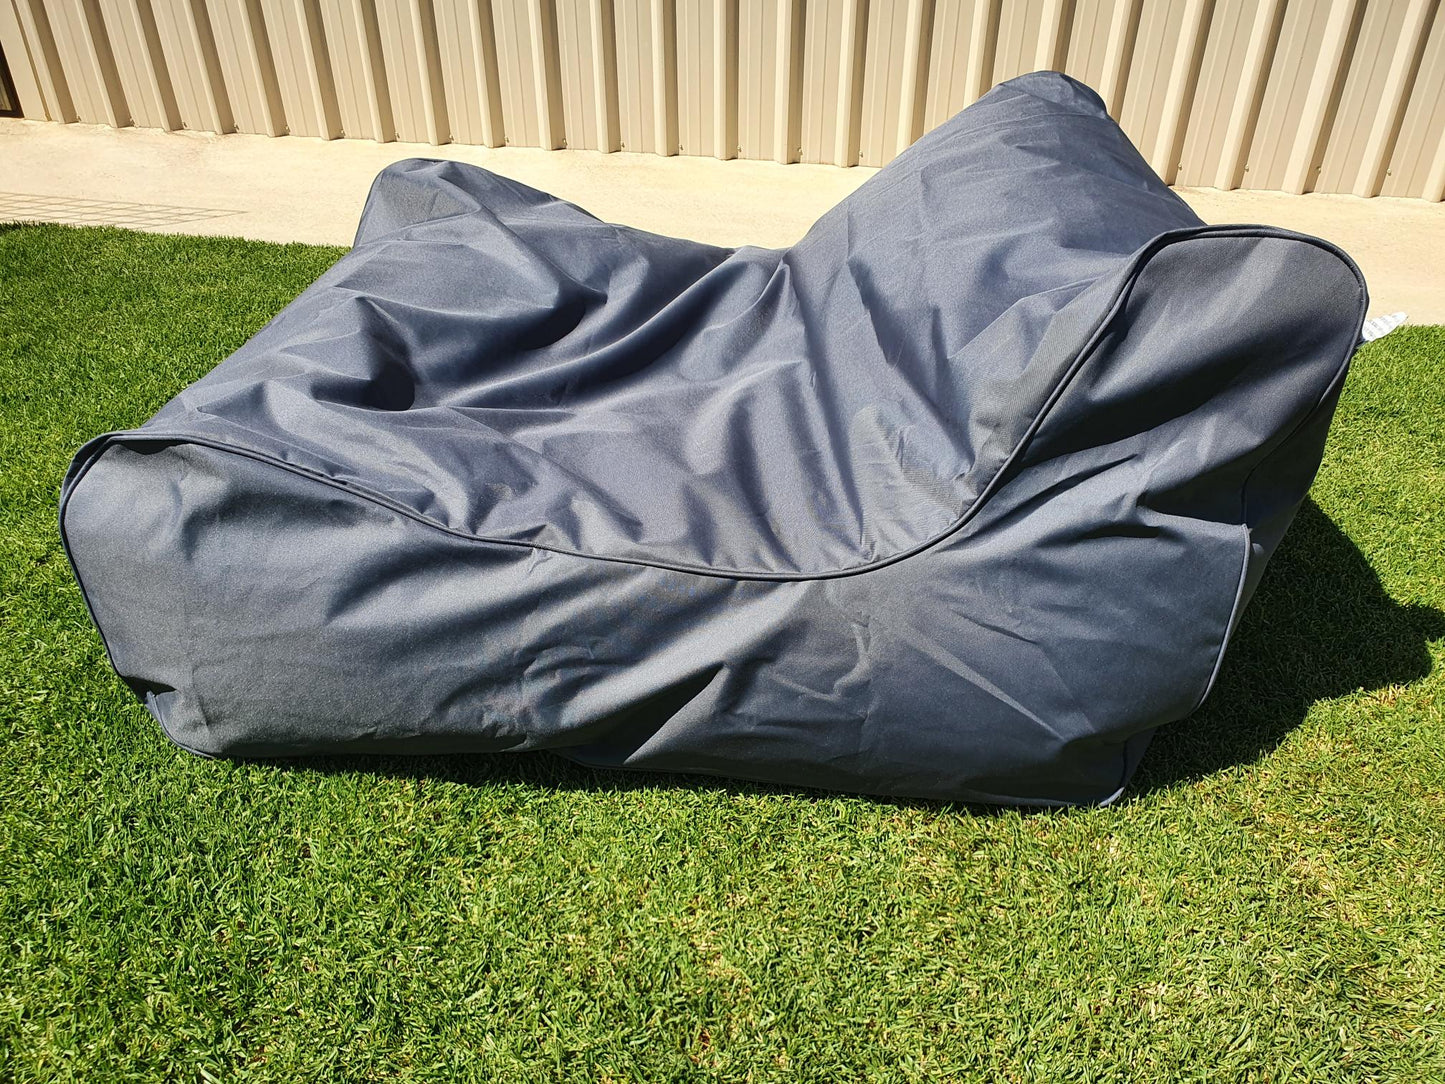 Colossus charcoal outdoor waterproof bean bag